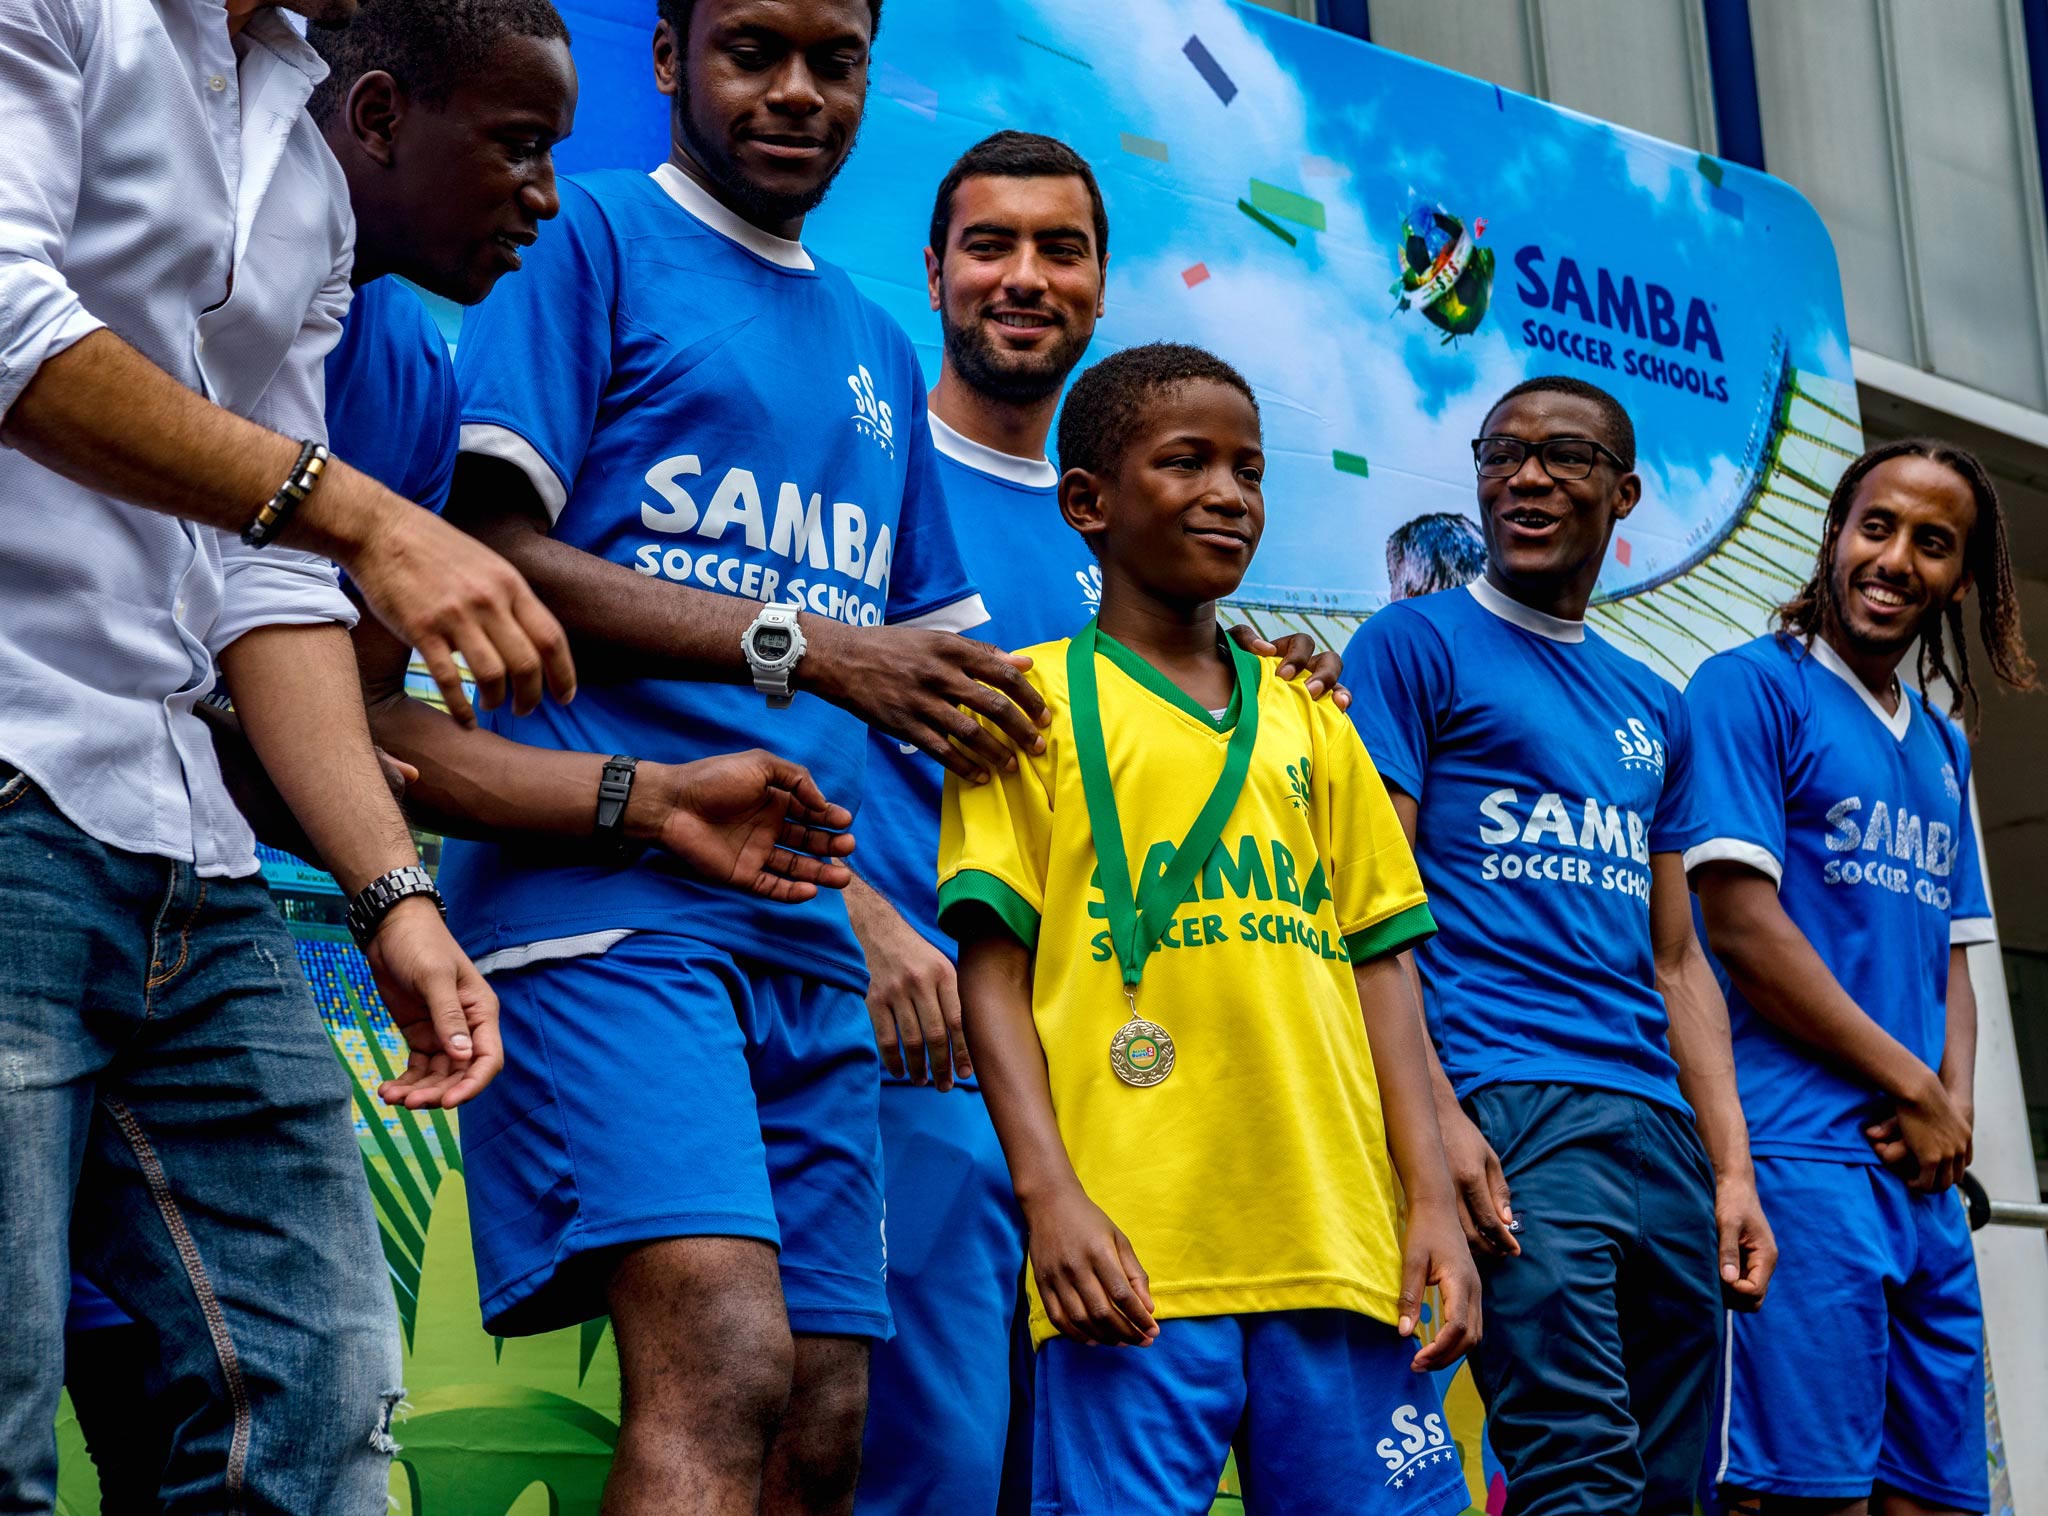 A boy receiving a medal at a football school event, standing proudly on stage in his football kit alongside his coaches.